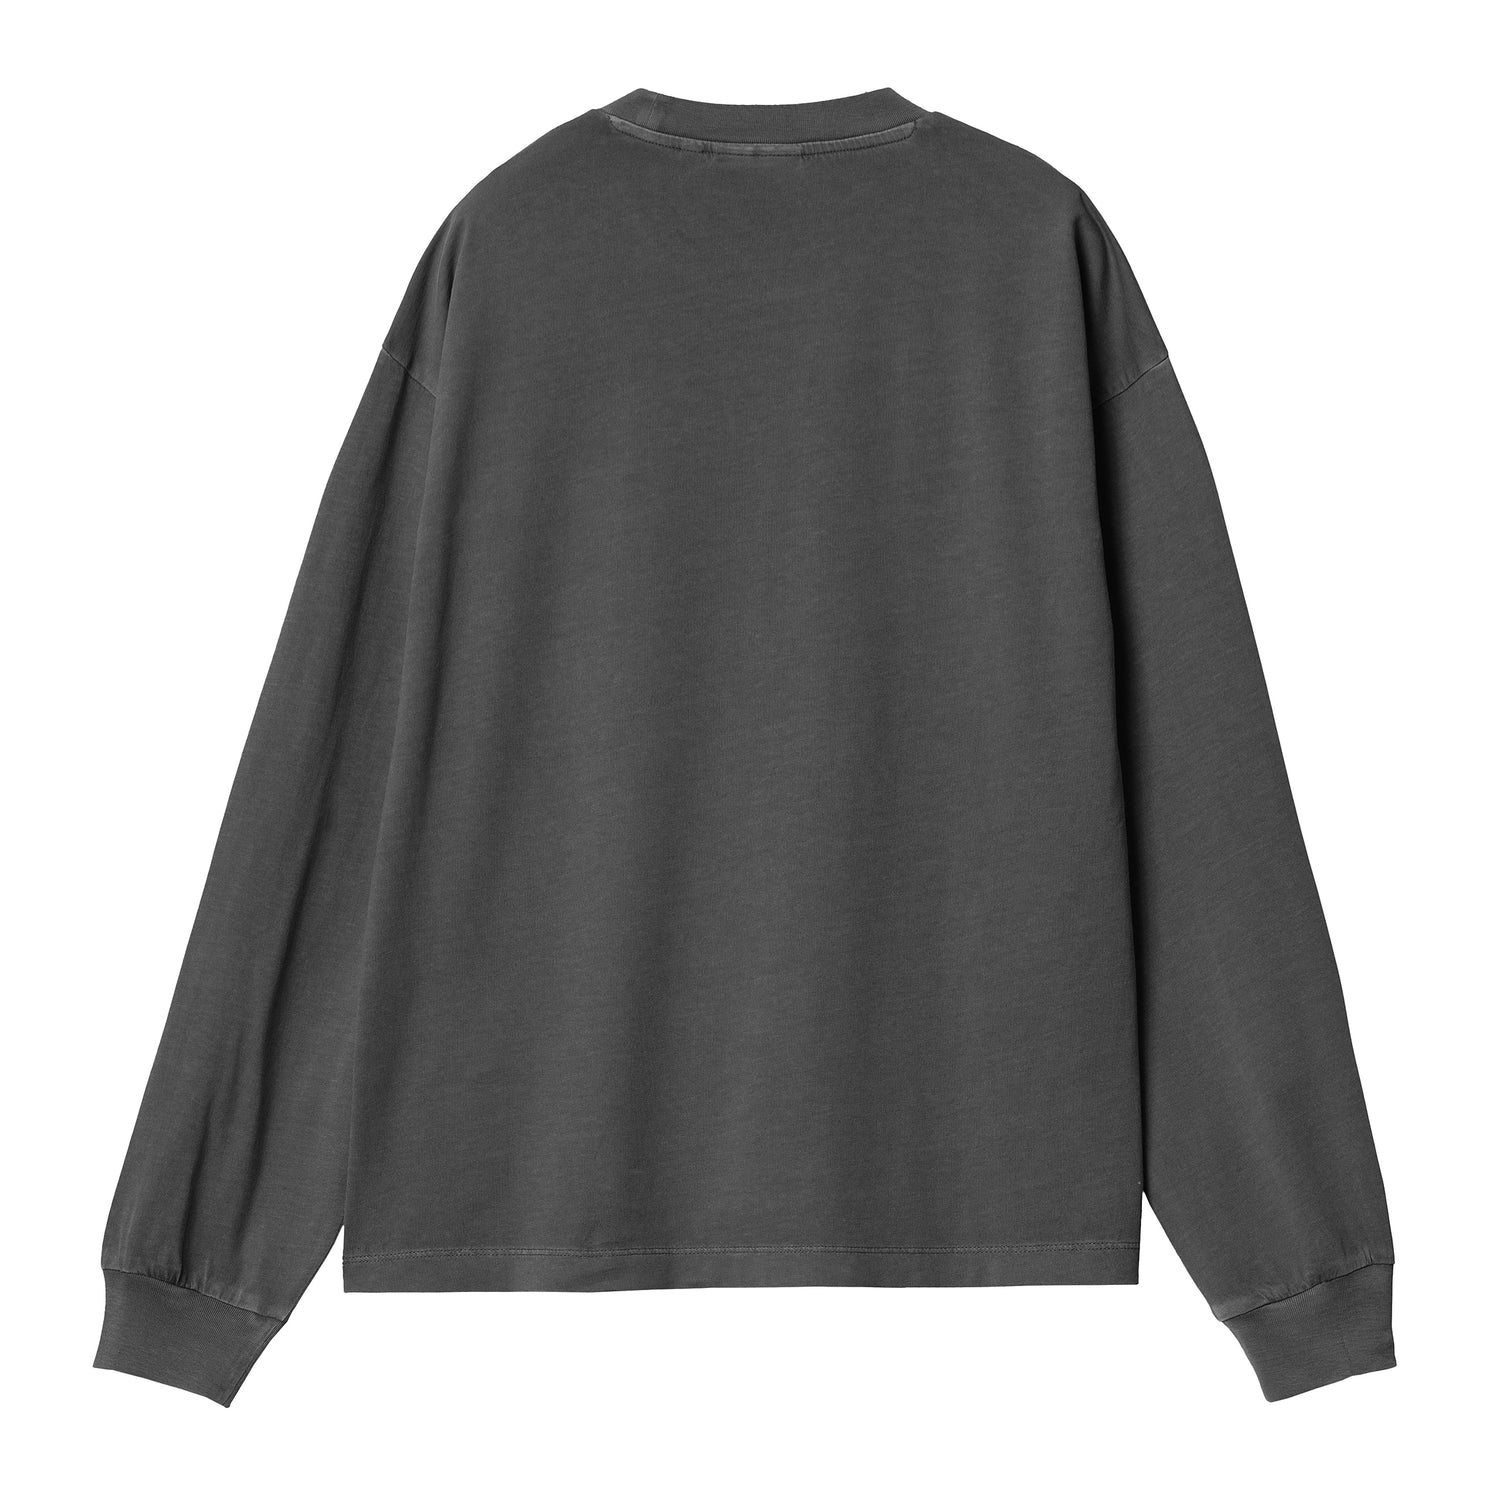 W' L/S NELSON T-SHIRT CHARCOAL GARMENT DYED